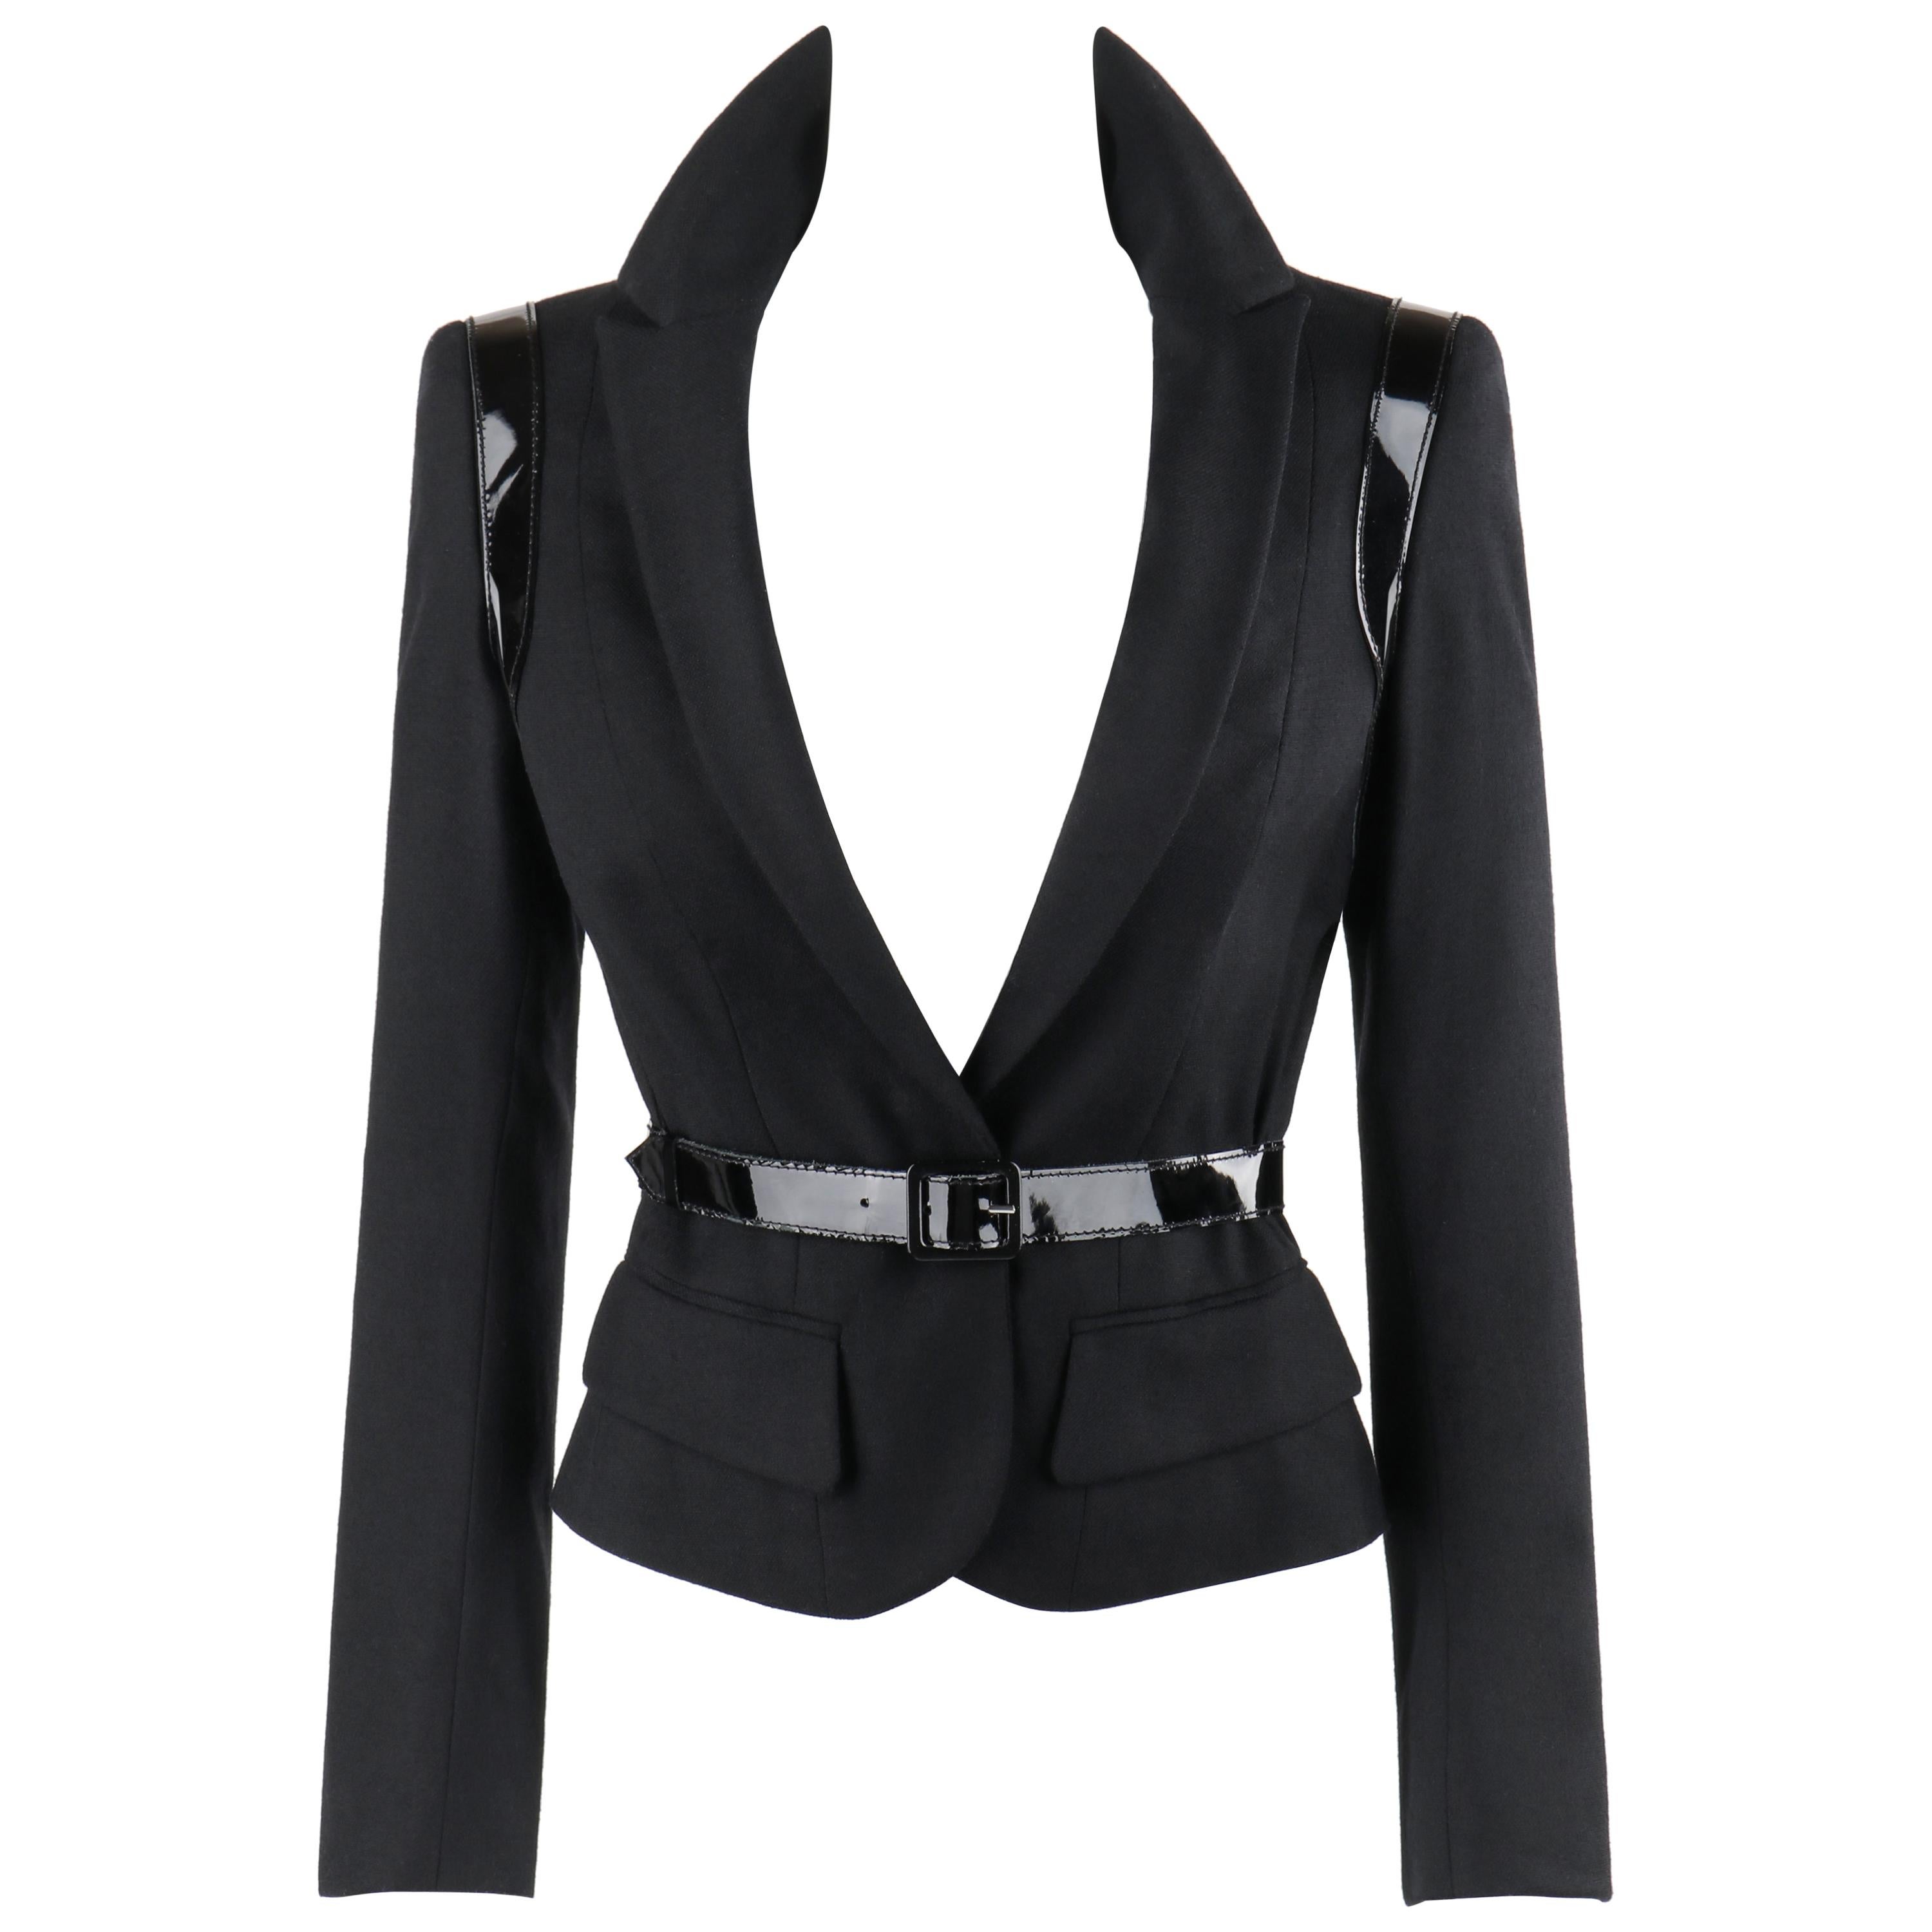 ALEXANDER McQUEEN A/W 2007 “Witches” Black Patent Leather Belted Blazer Jacket For Sale